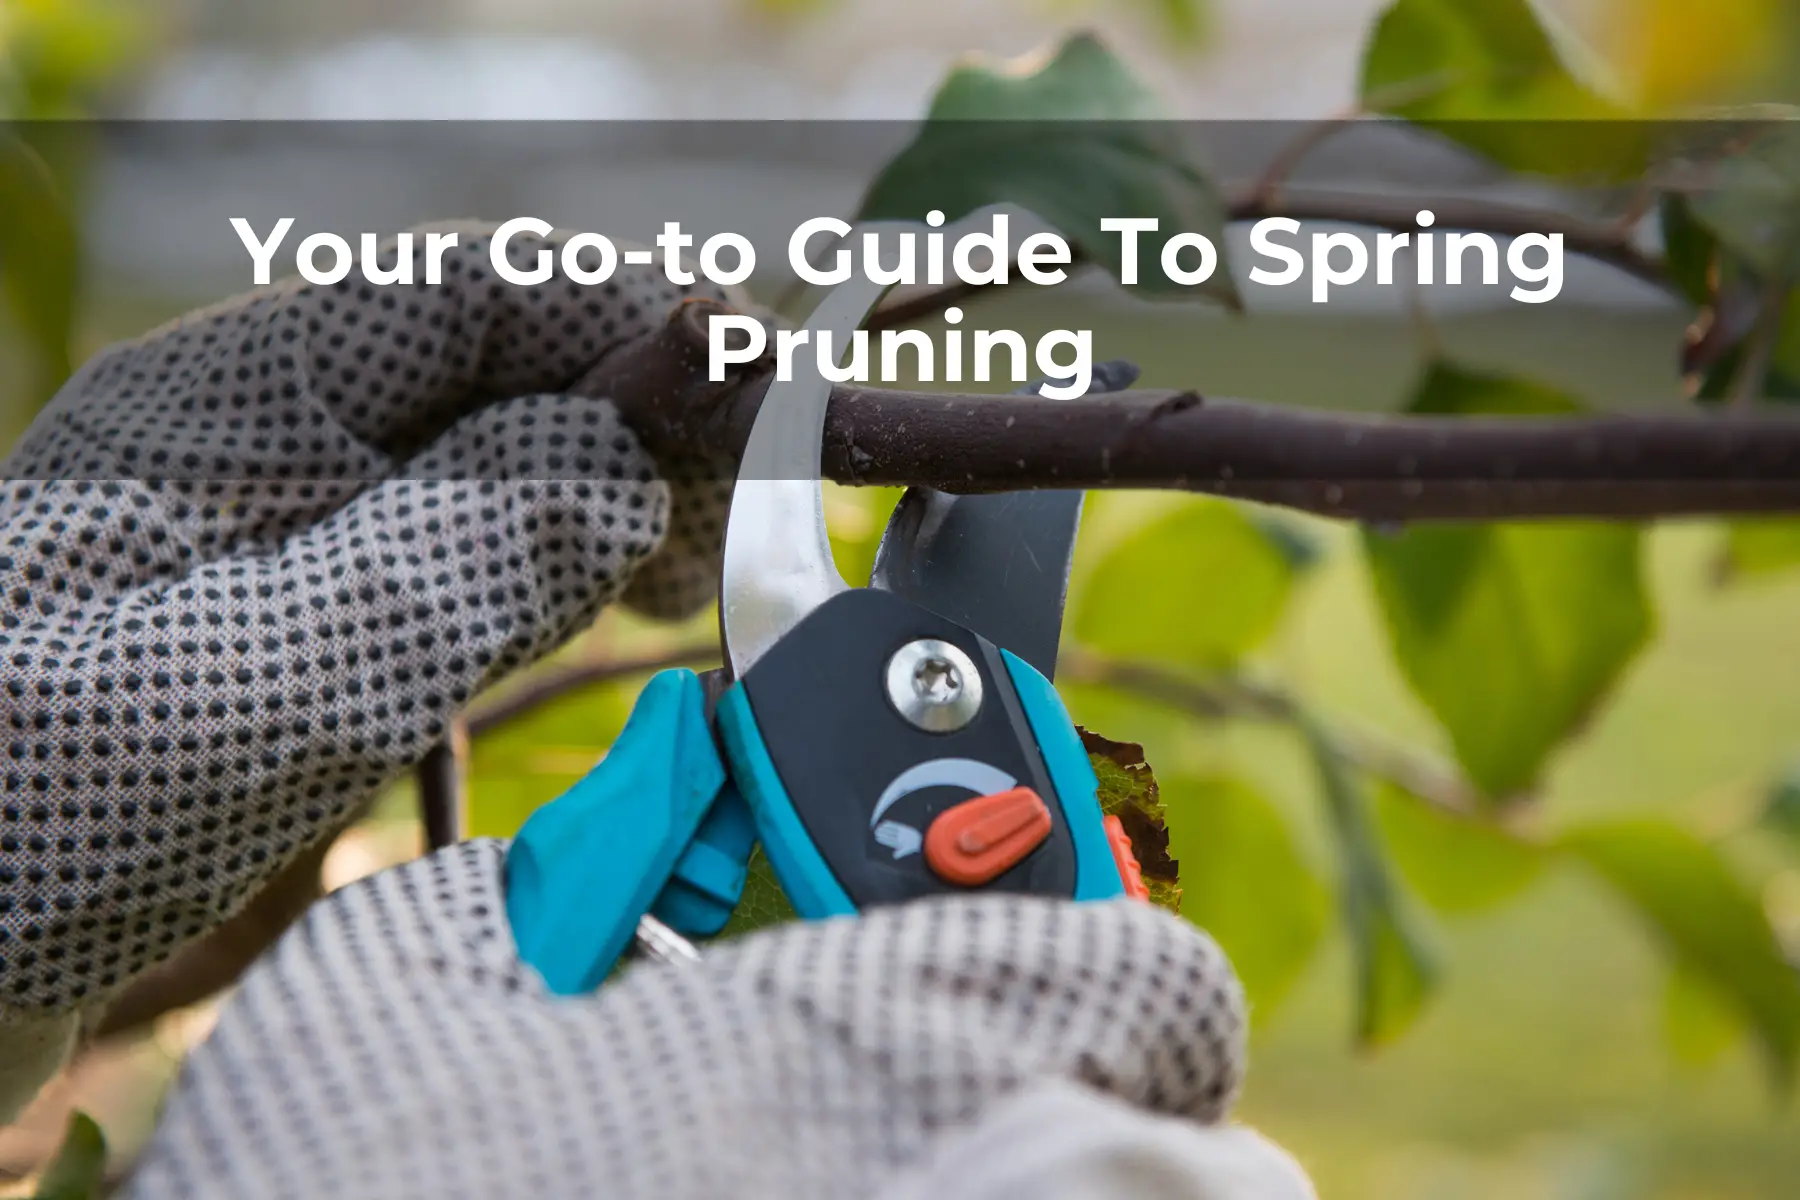 Your Go-to Guide To Spring Pruning